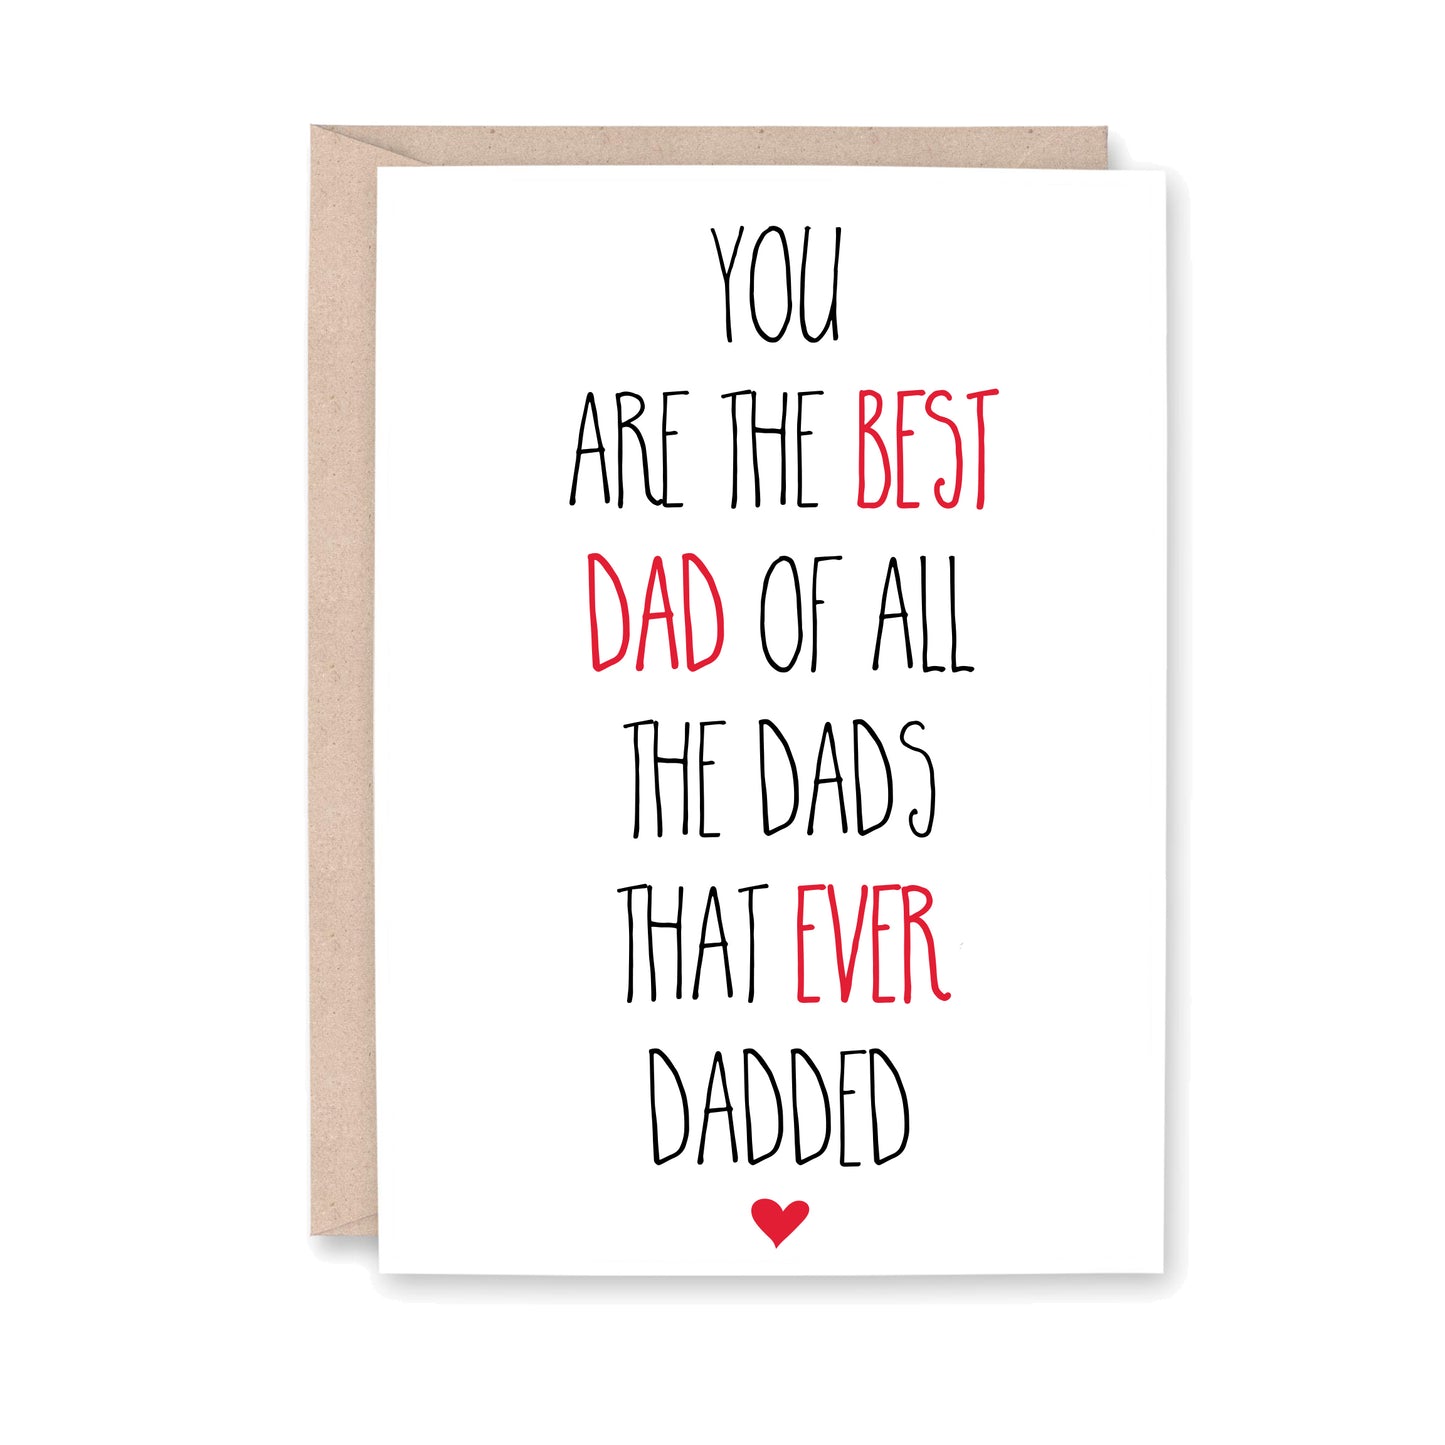 You are the best dad of all the dads that ever dadded